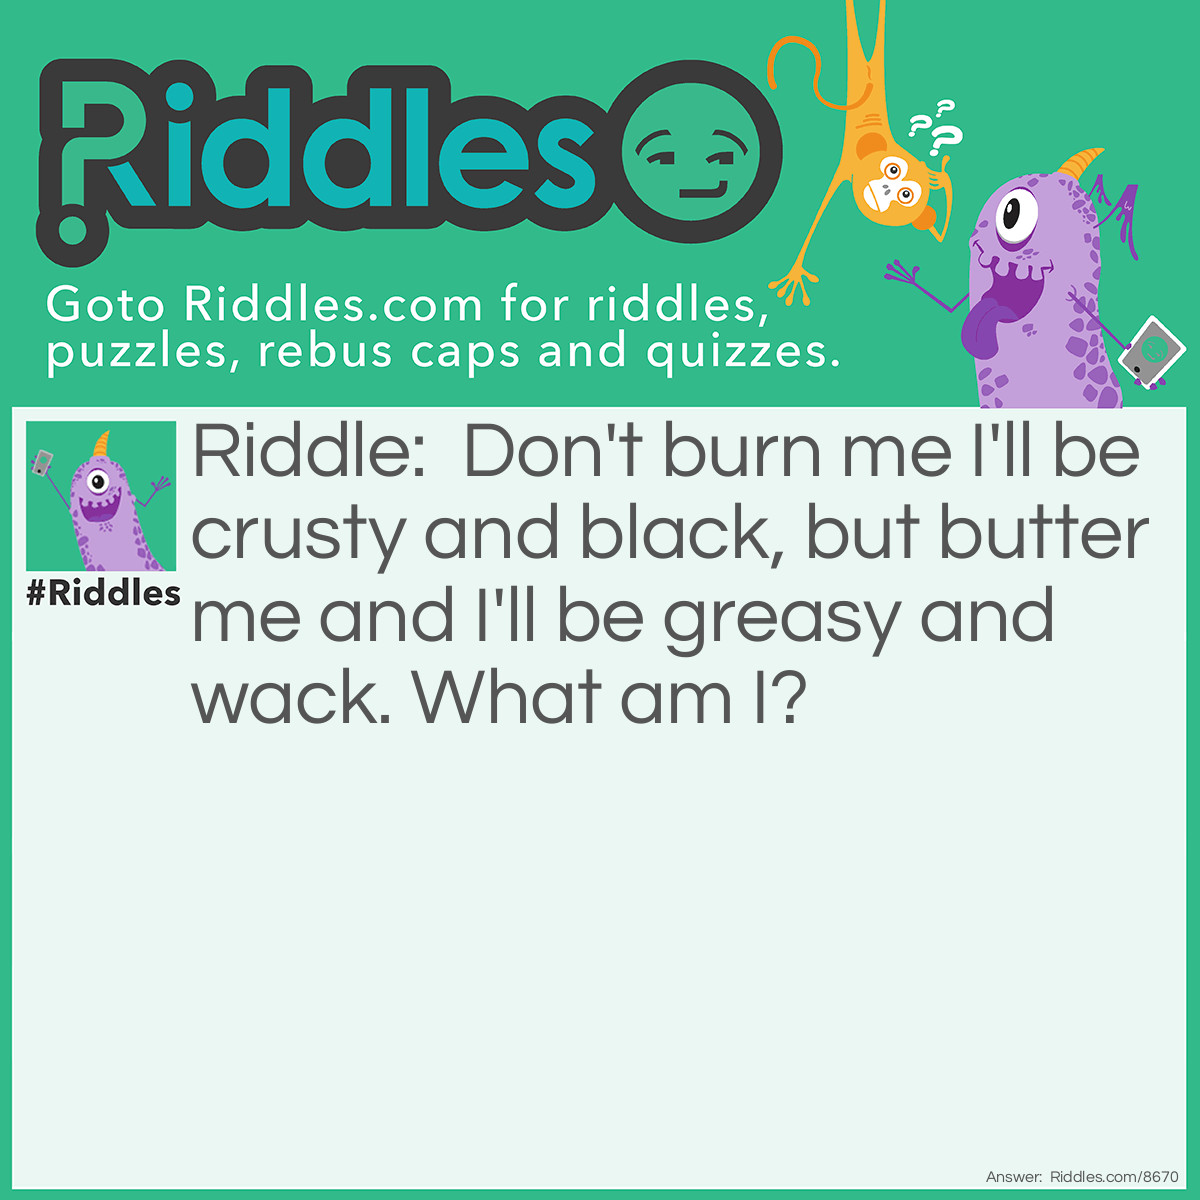 Riddle: Don't burn me I'll be crusty and black, but butter me and I'll be greasy and wack. What am I? Answer: I CANT FIND THE ANSWER PLS HELP ME!!!??? PLEASE TYPE IN THE COOMMNETS IF U KNOWHELLLLLPPP,.